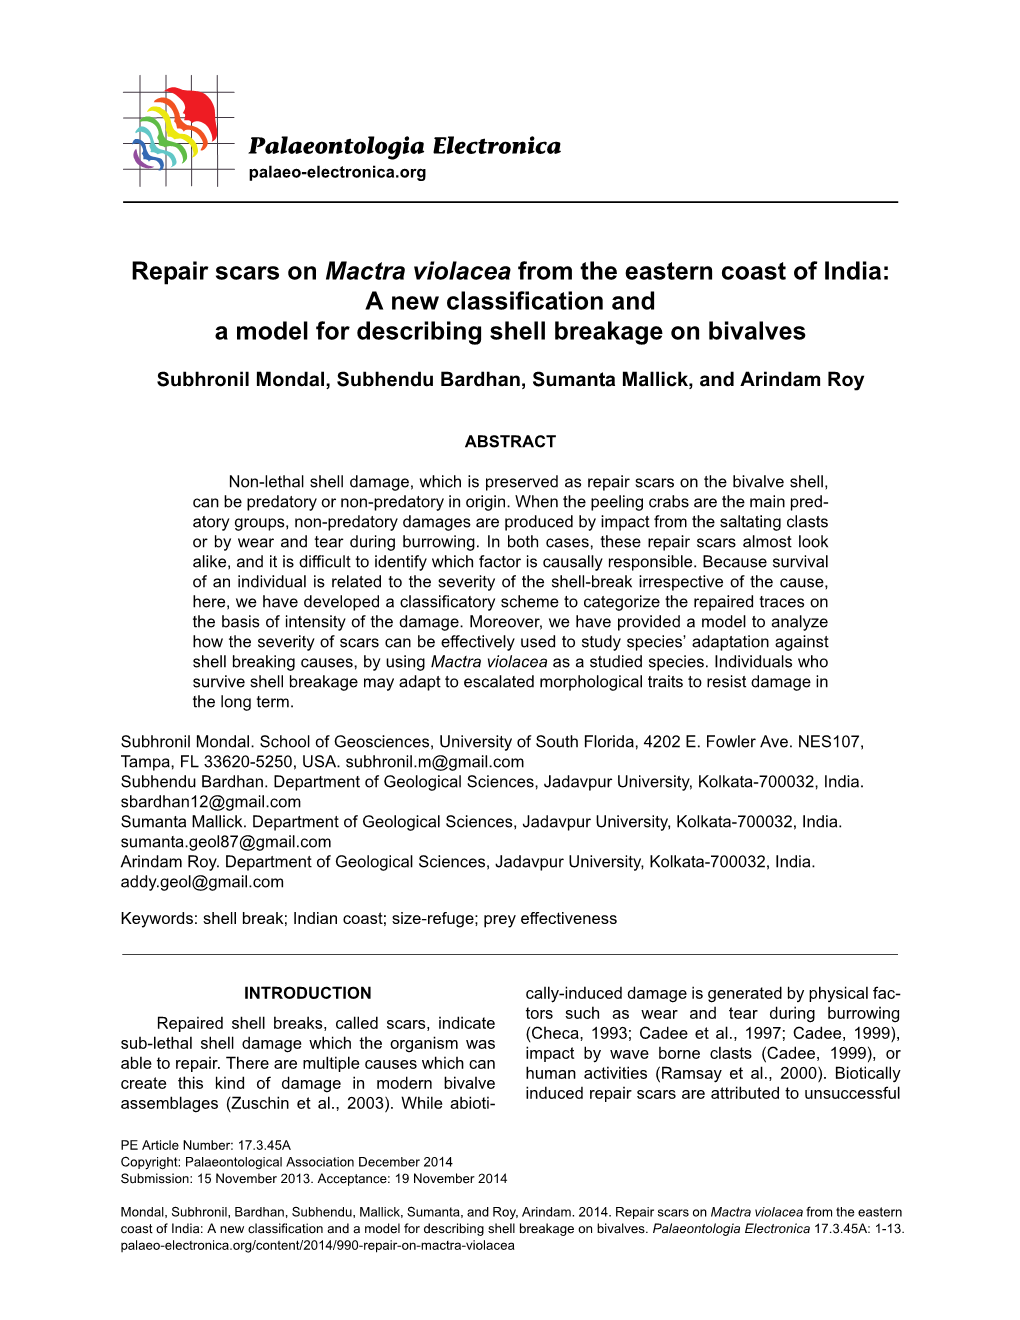 Repair Scars on Mactra Violacea from the Eastern Coast of India: a New Classification and a Model for Describing Shell Breakage on Bivalves